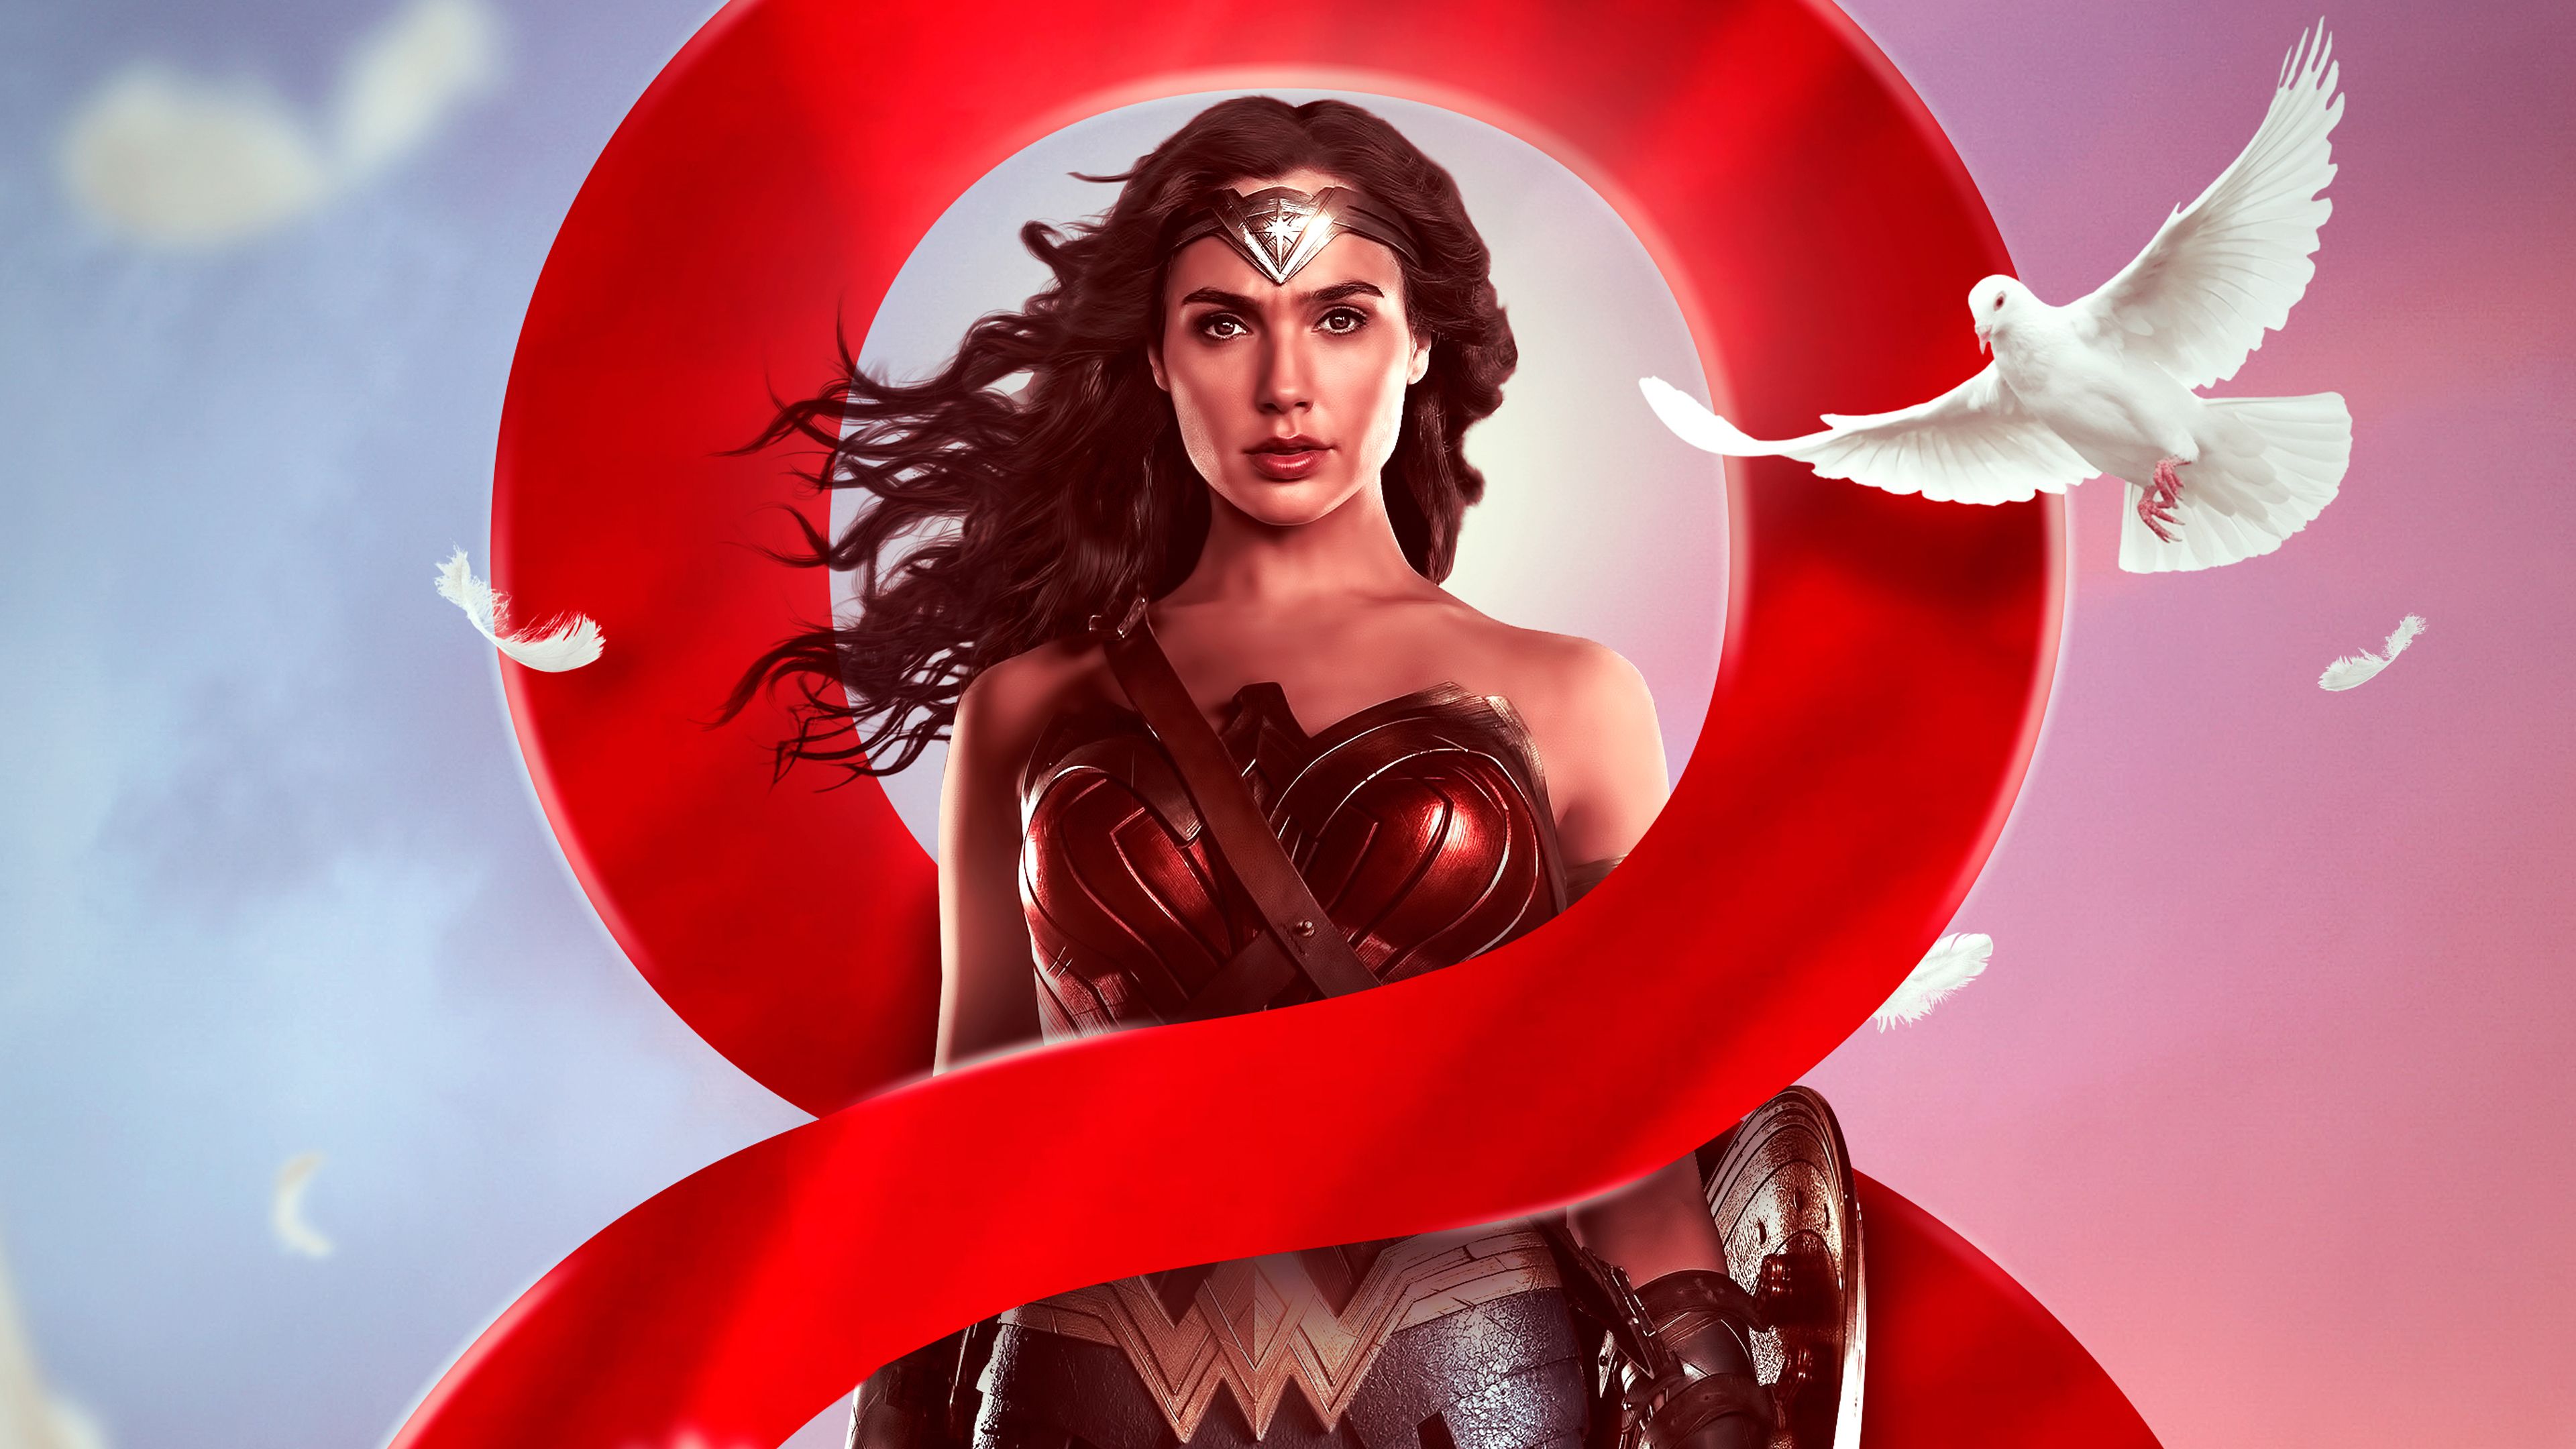 Wonder Woman Poster Design 4k, HD Superheroes, 4k Wallpaper, Image, Background, Photo and Picture